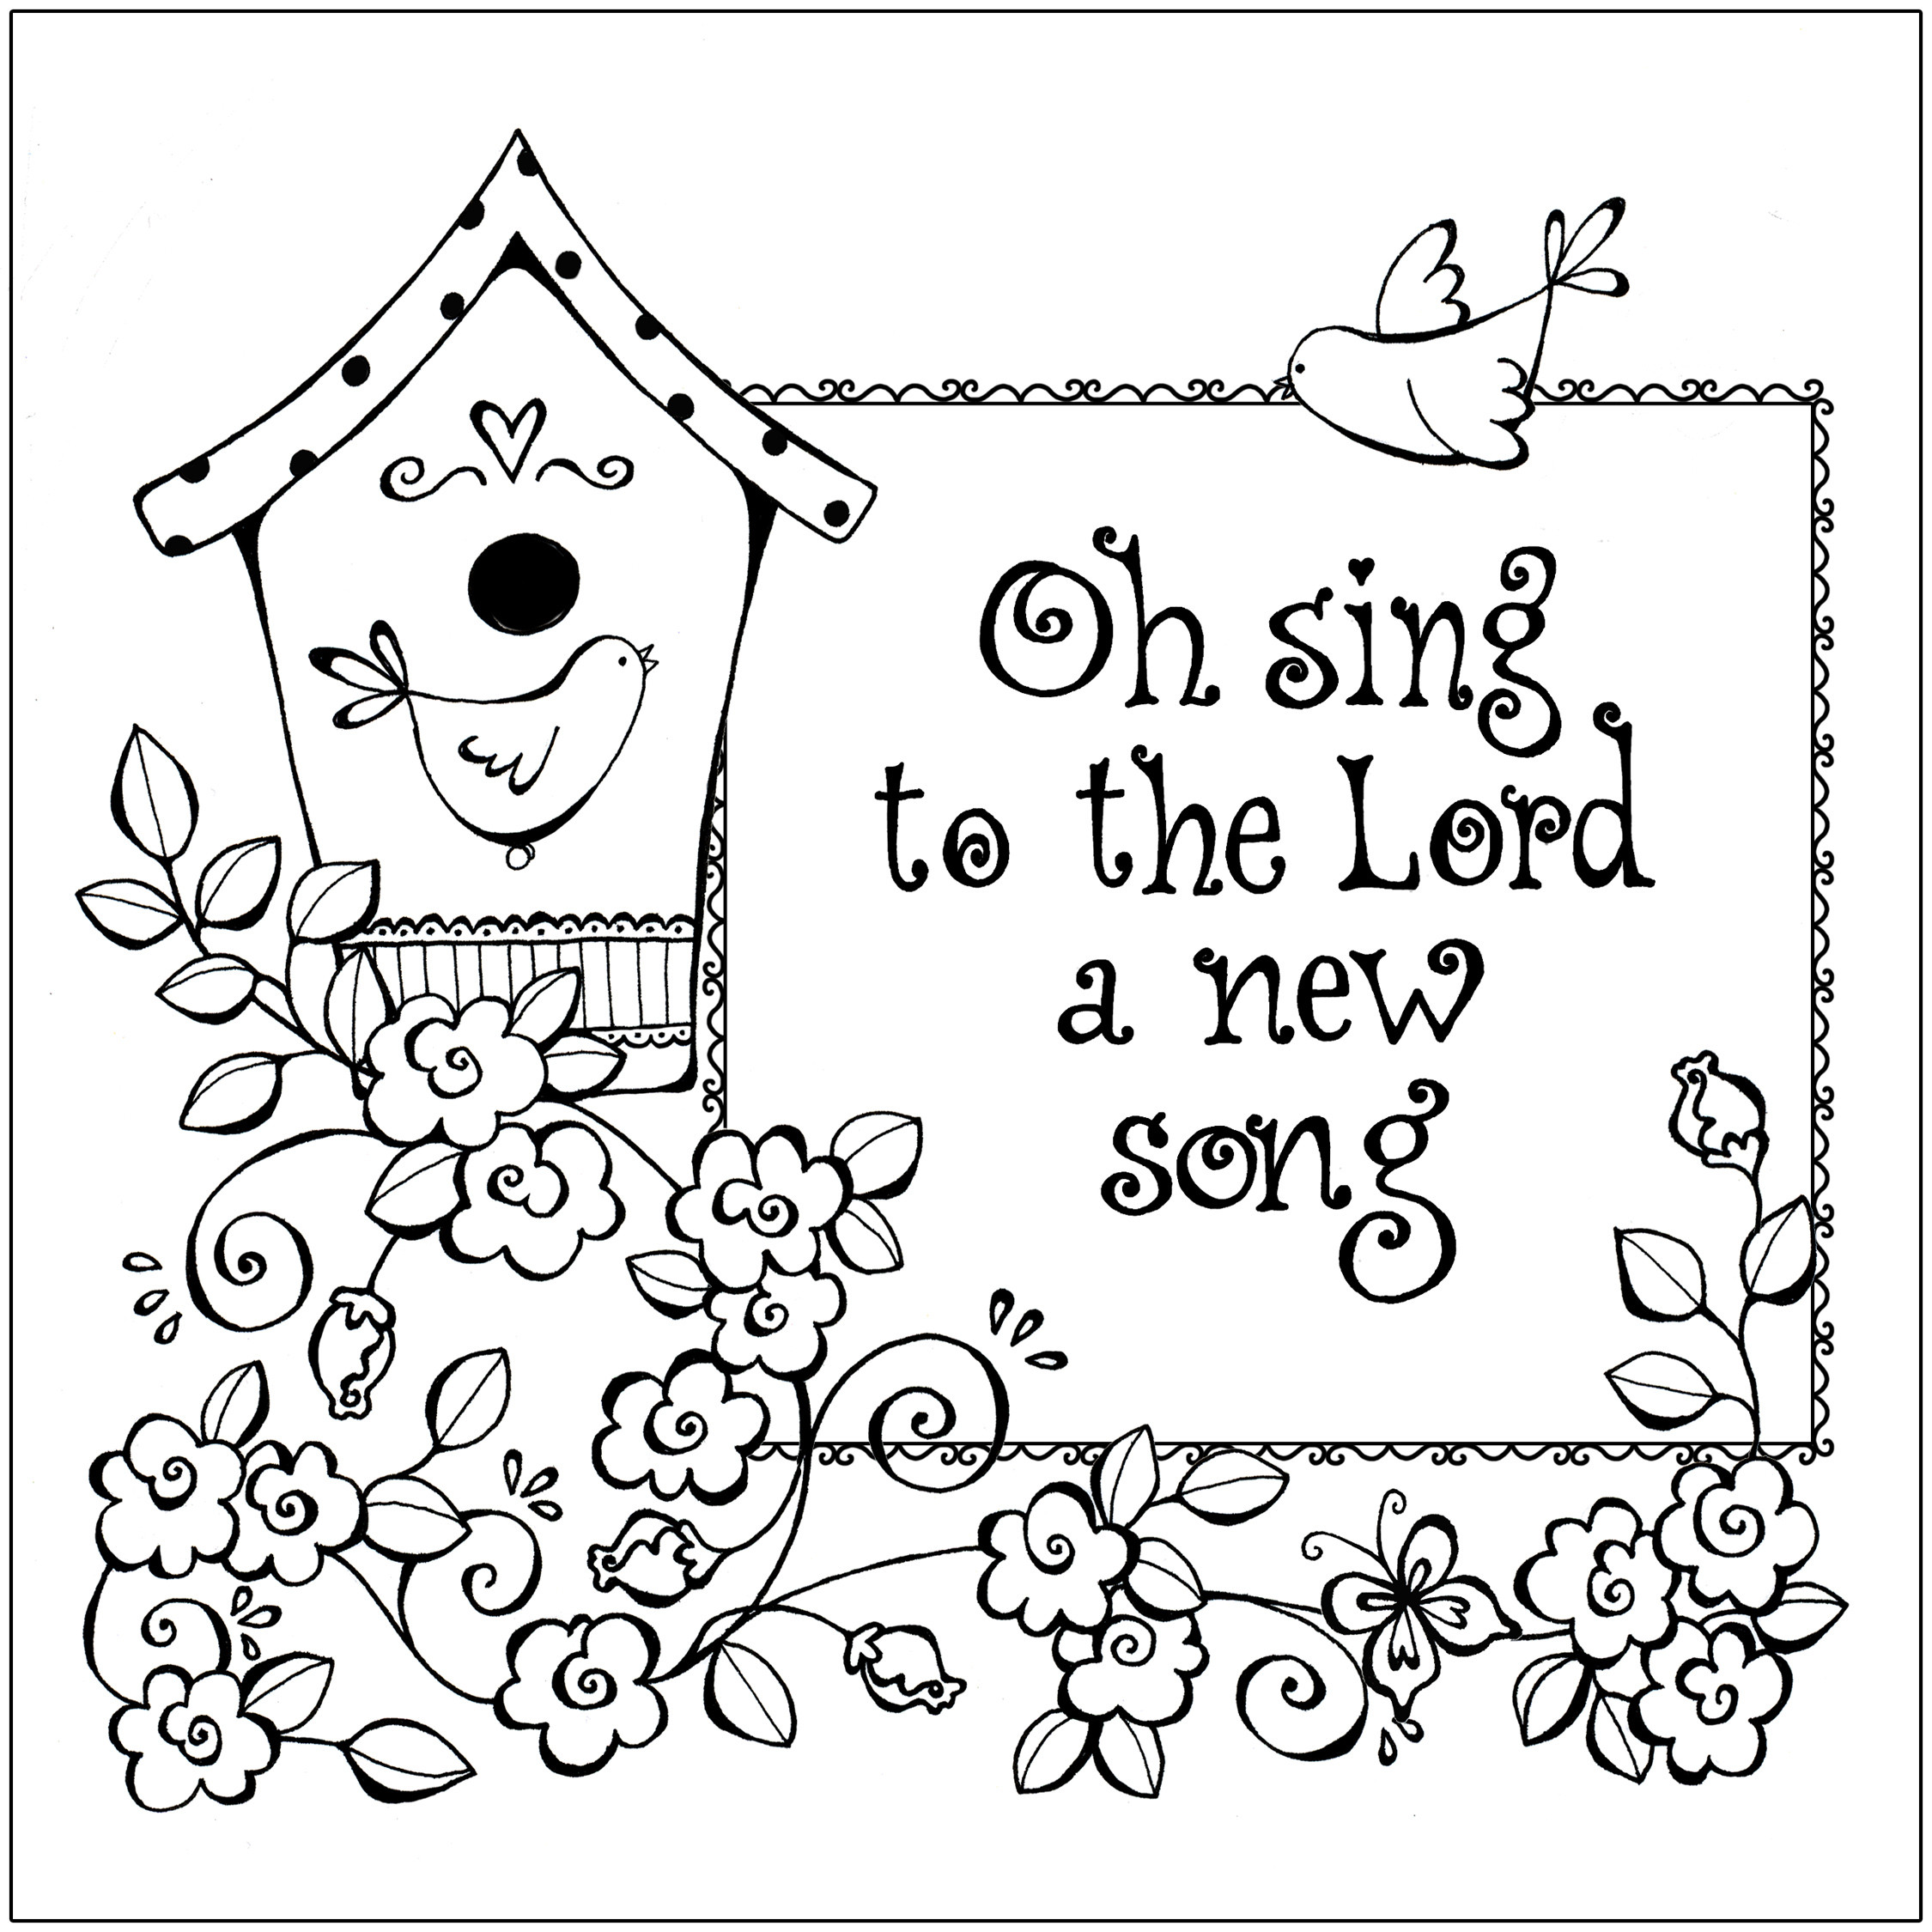 Christian Printable Coloring Sheets For Girls
 Free Printable Christian Coloring Pages For Kids Best Free